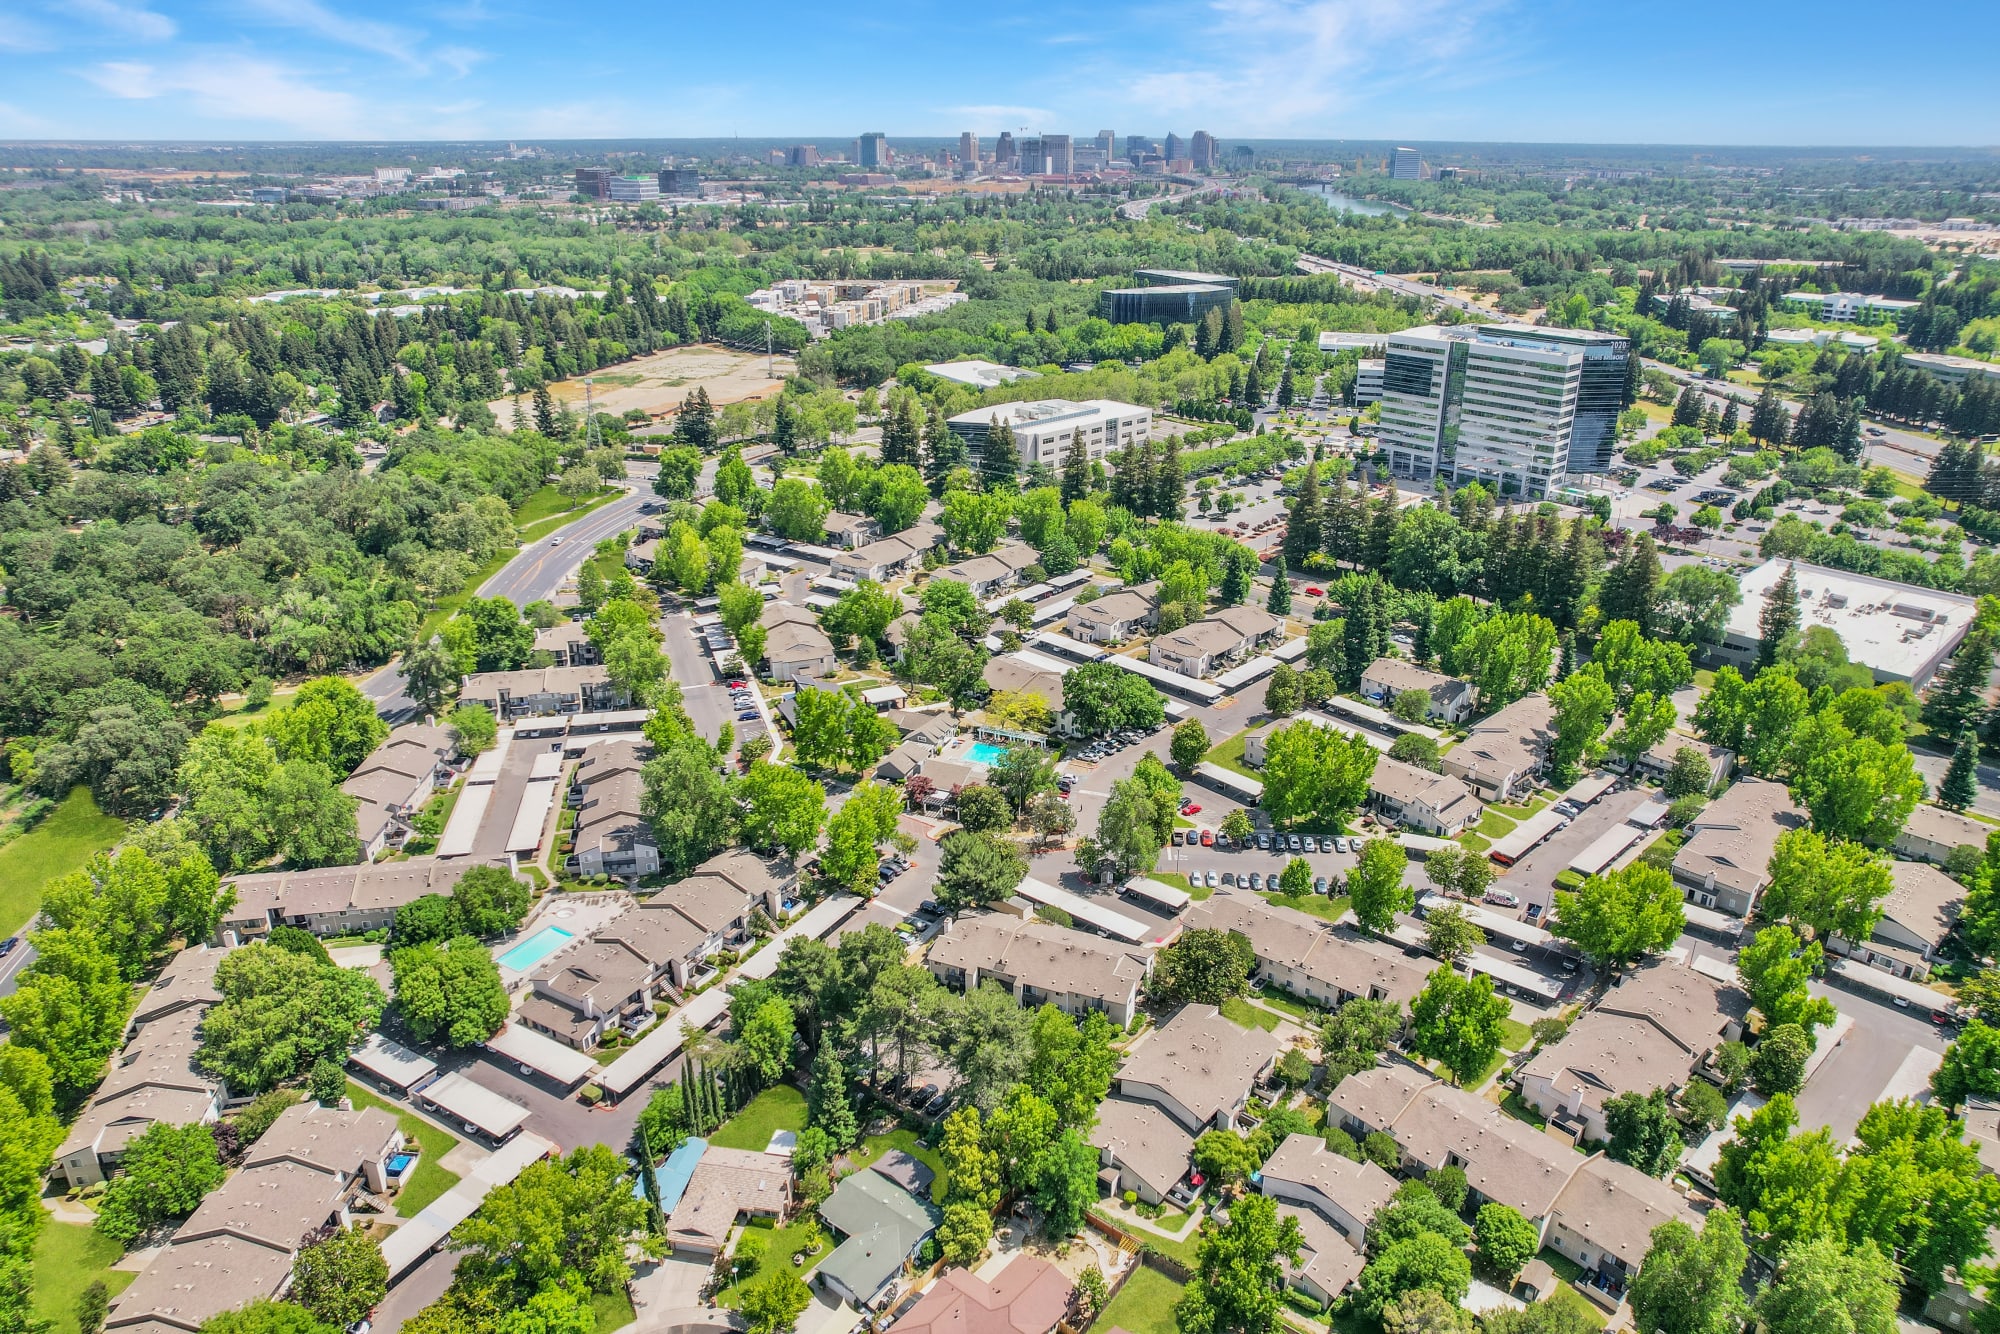 Aerial view of the property and surrounding area at The Woodlands Apartments in Sacramento, California